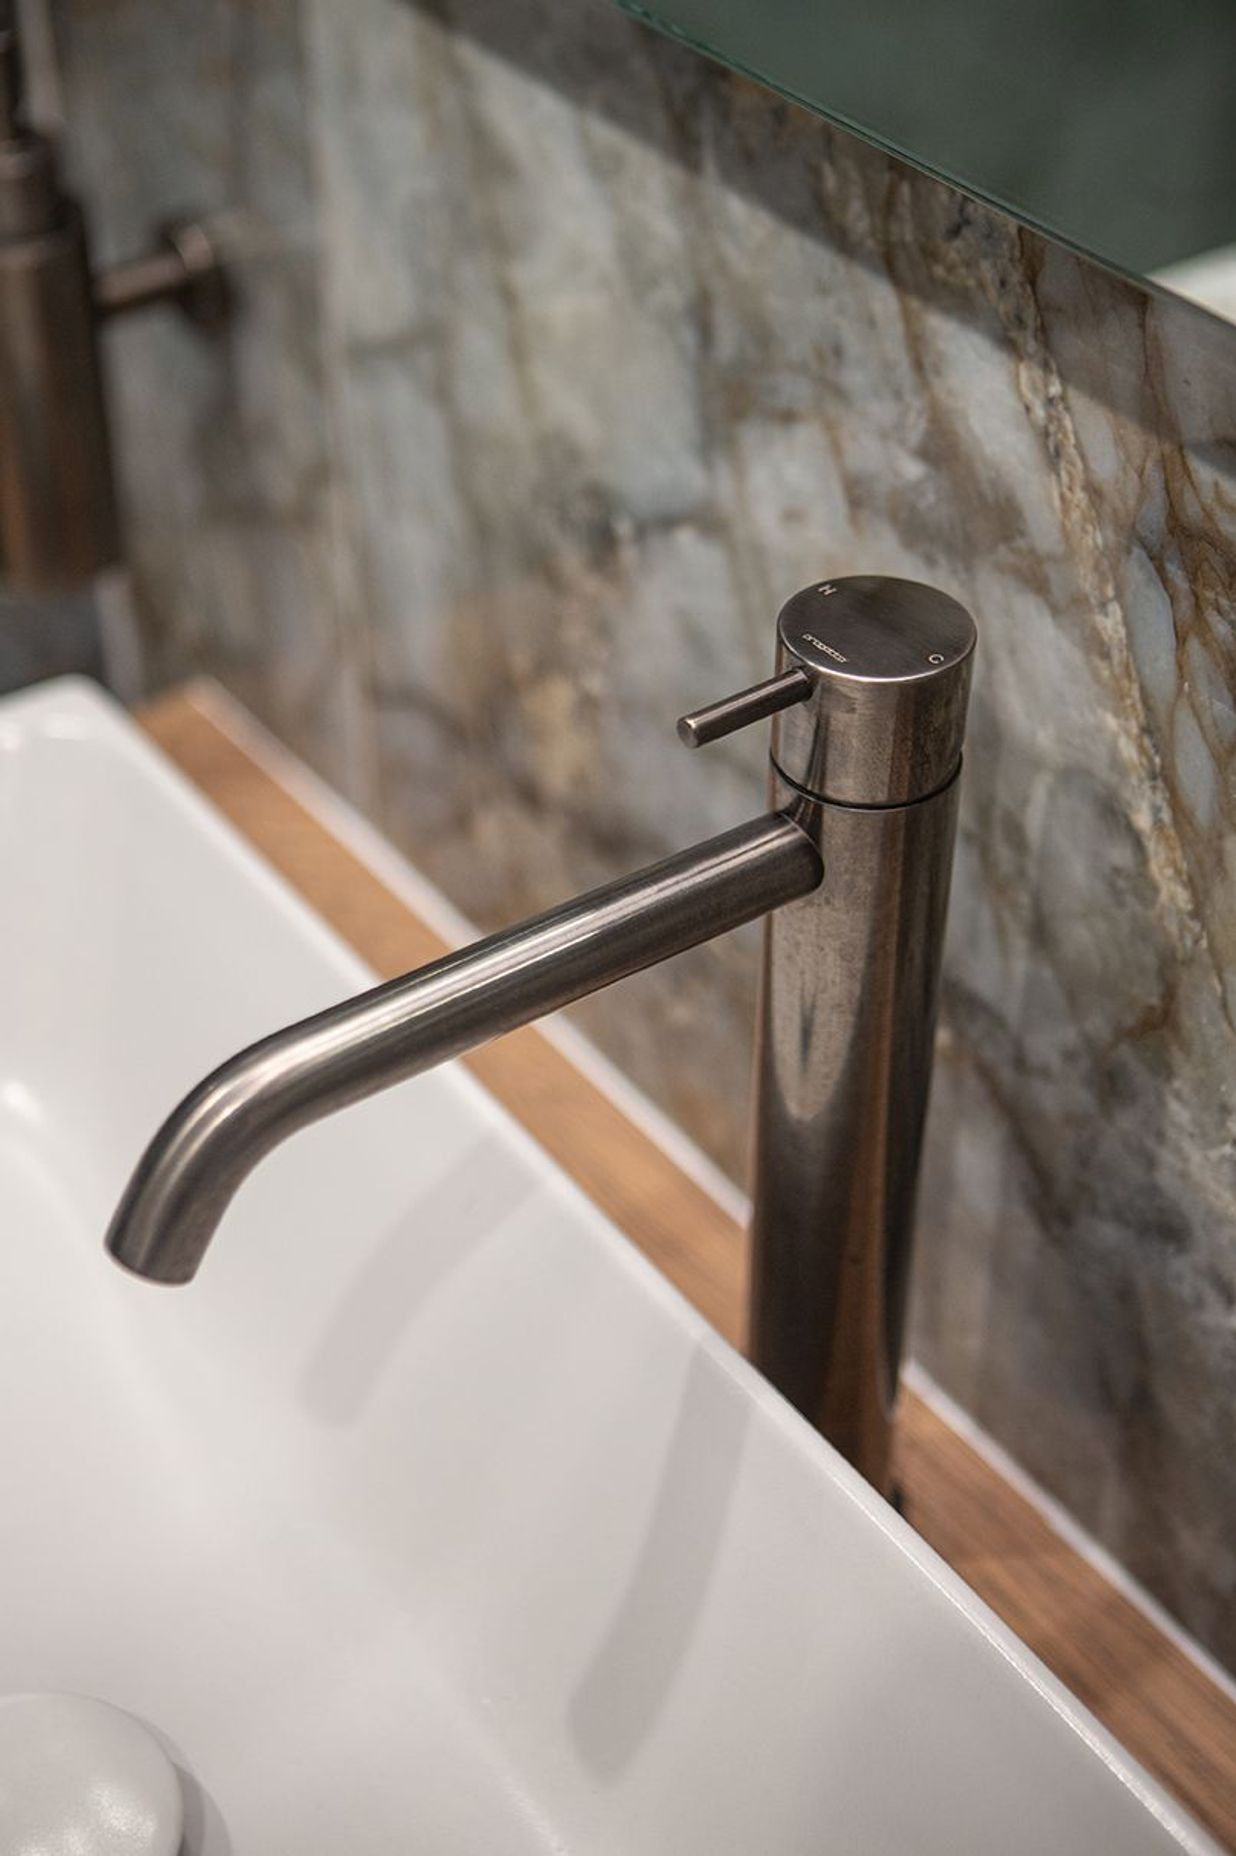 Aged iron basin mixer sits perfectly alongside the Patagonia tile.